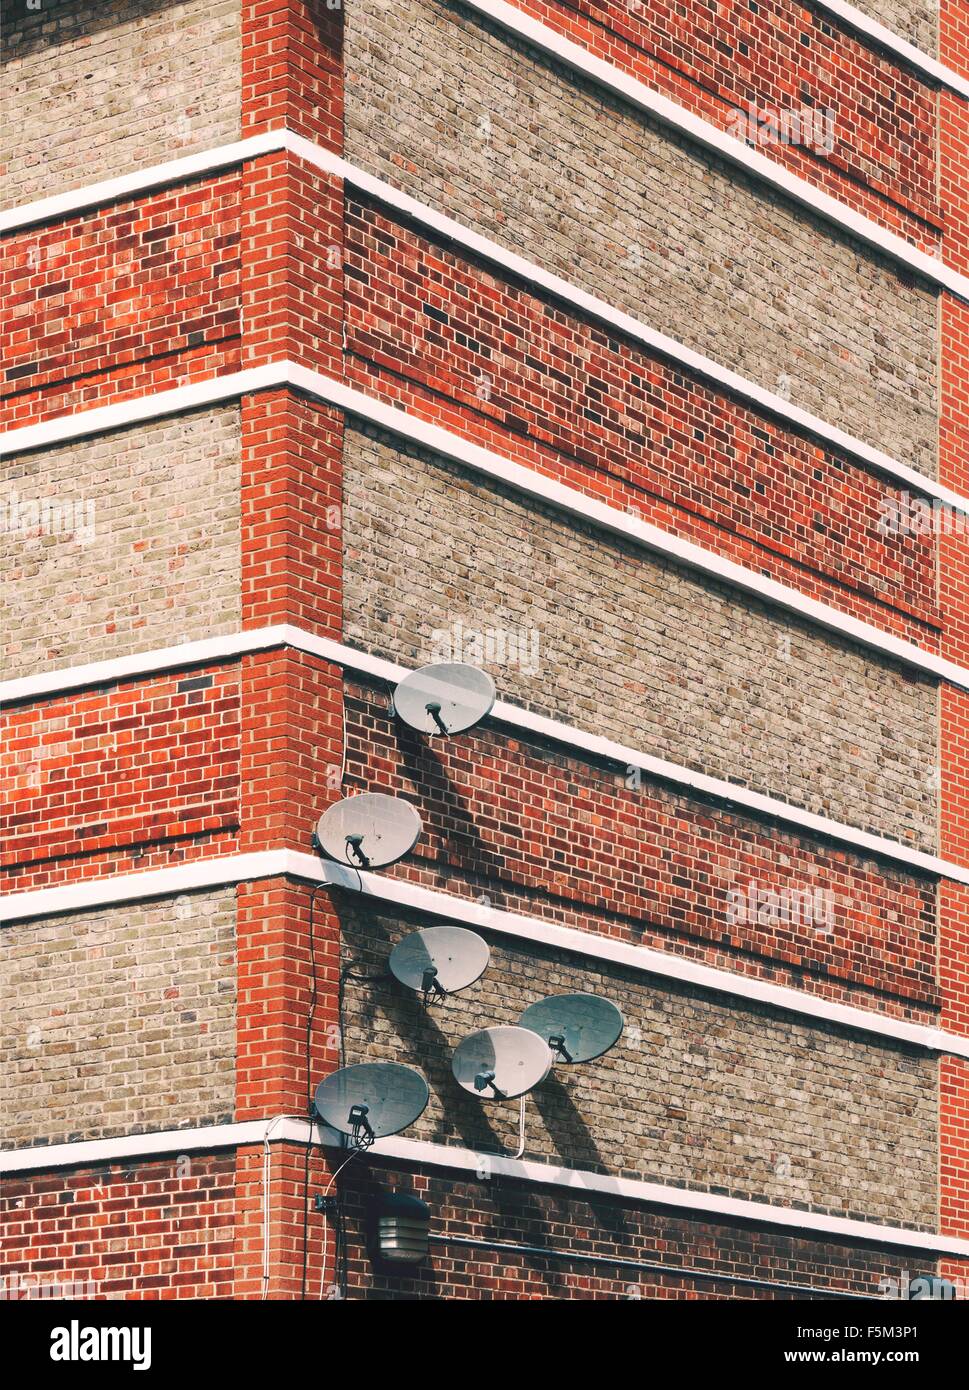 Detail of satellite dishes attached to building Stock Photo